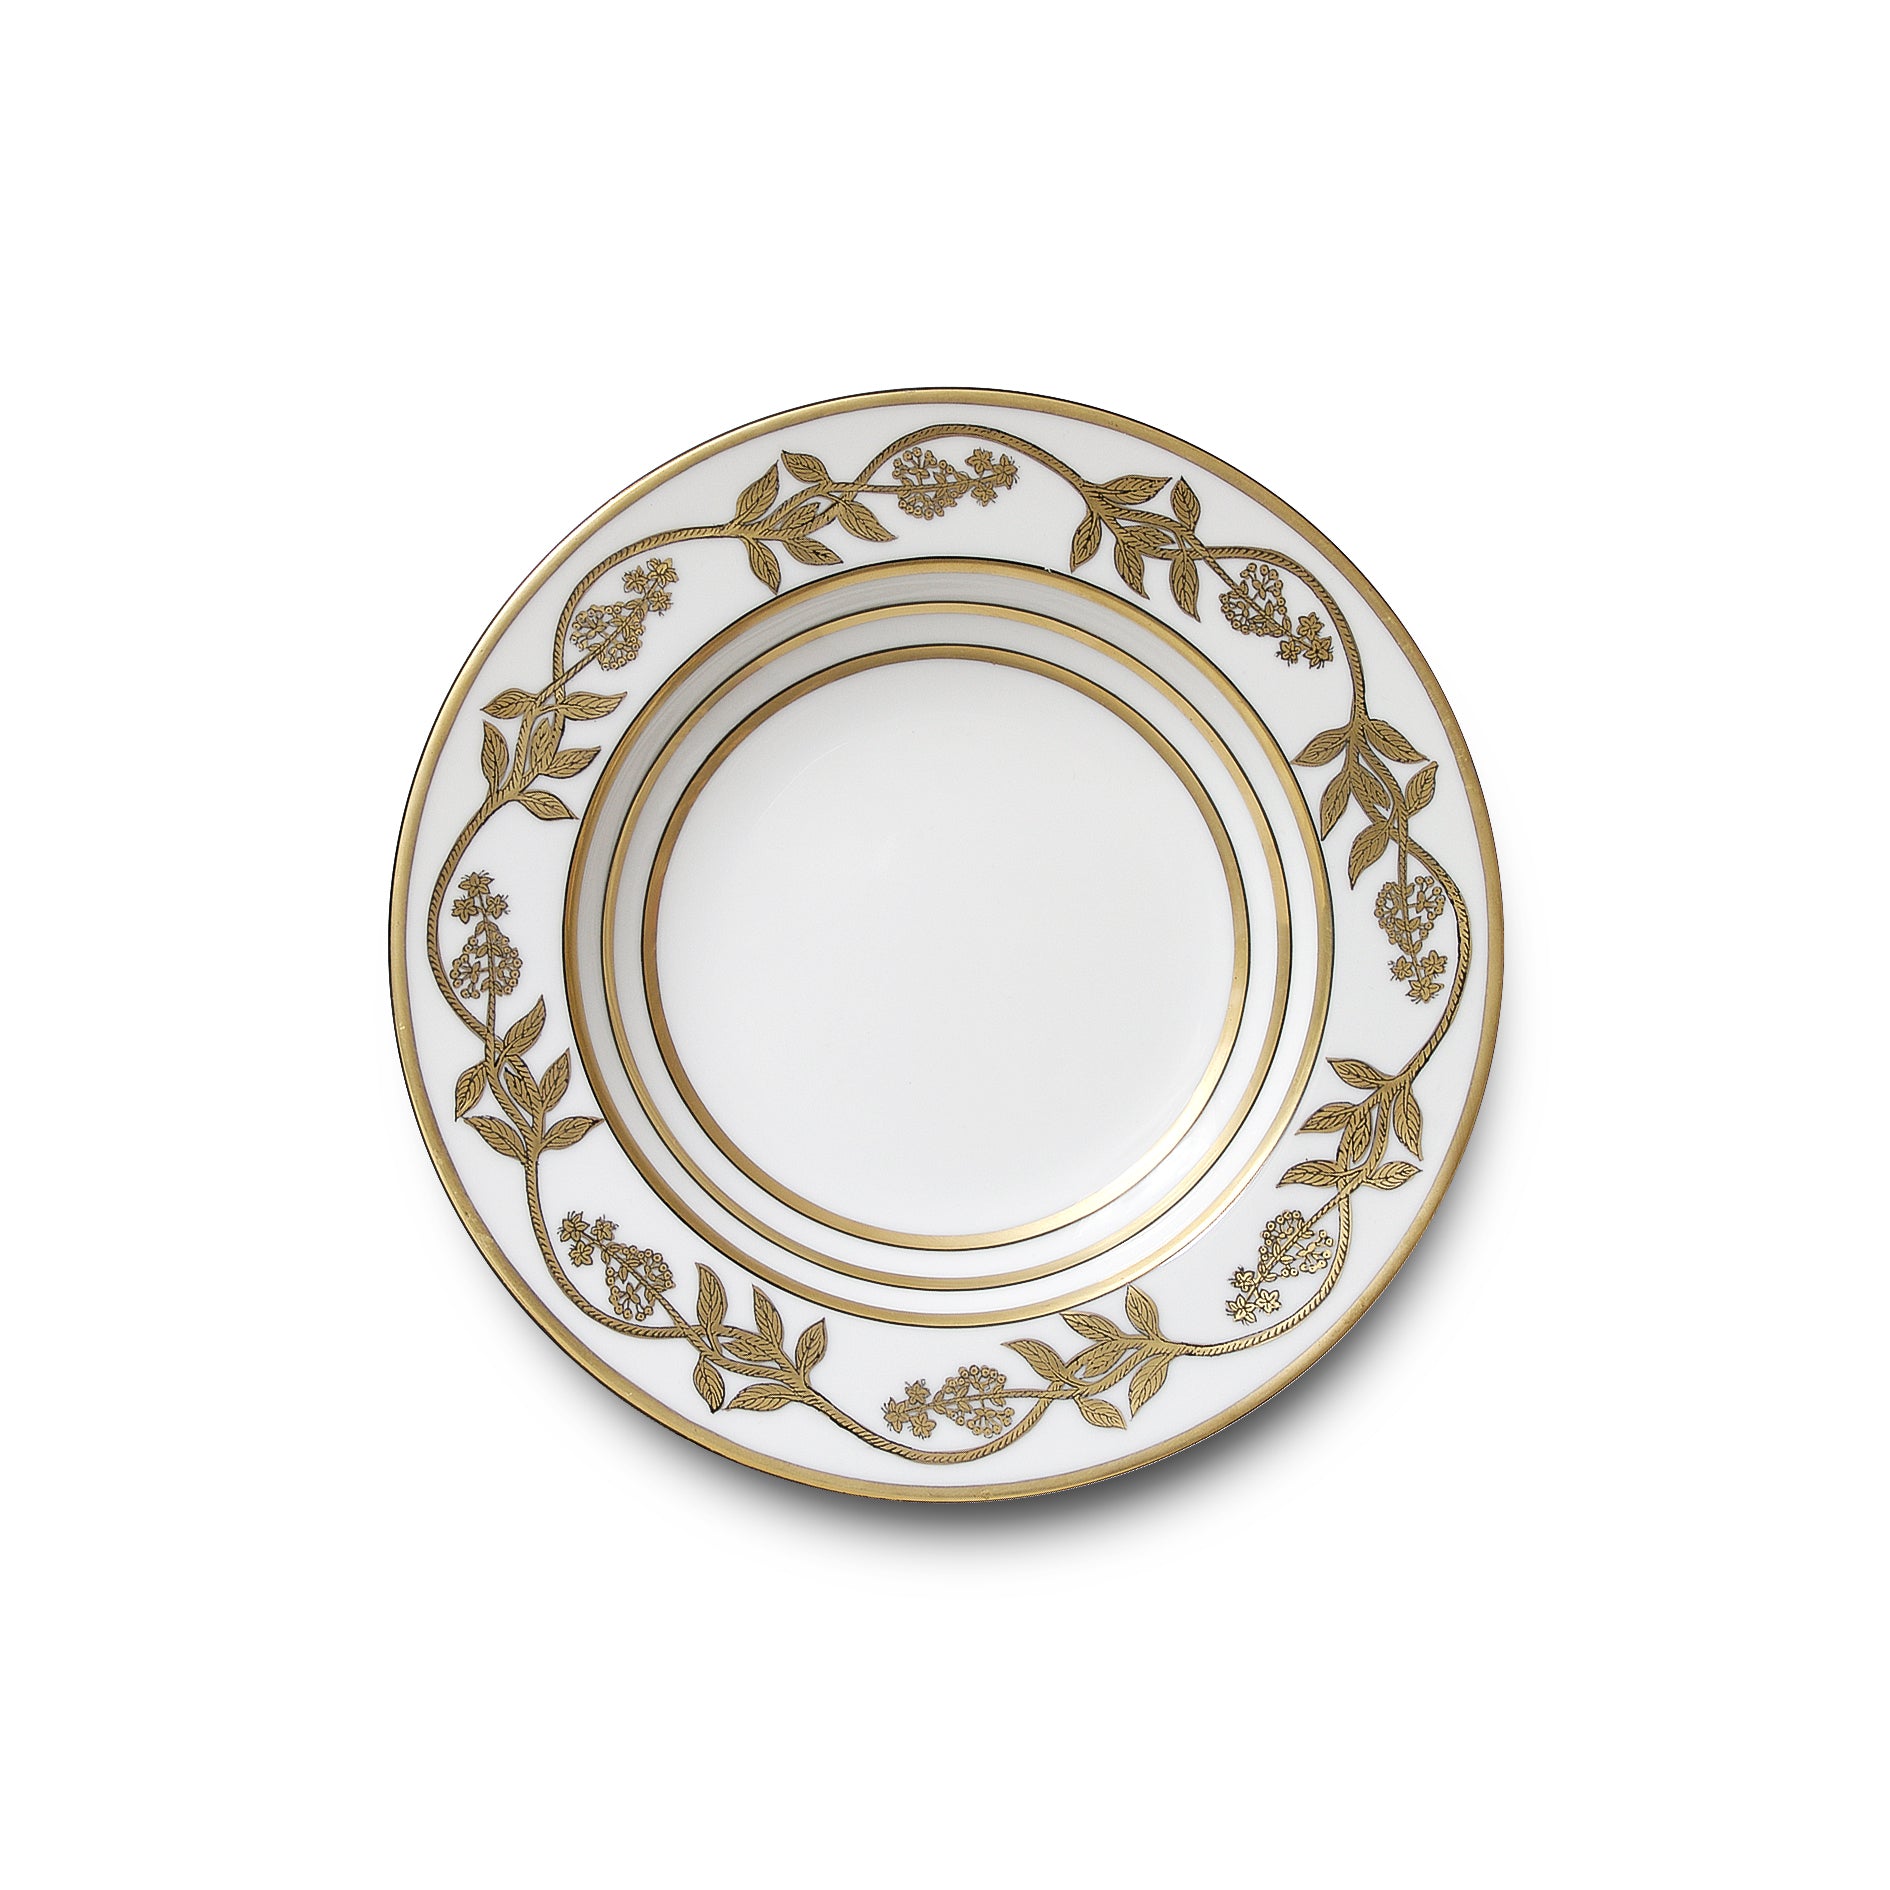 Or des Airs - Or des Mers - Soup plate
